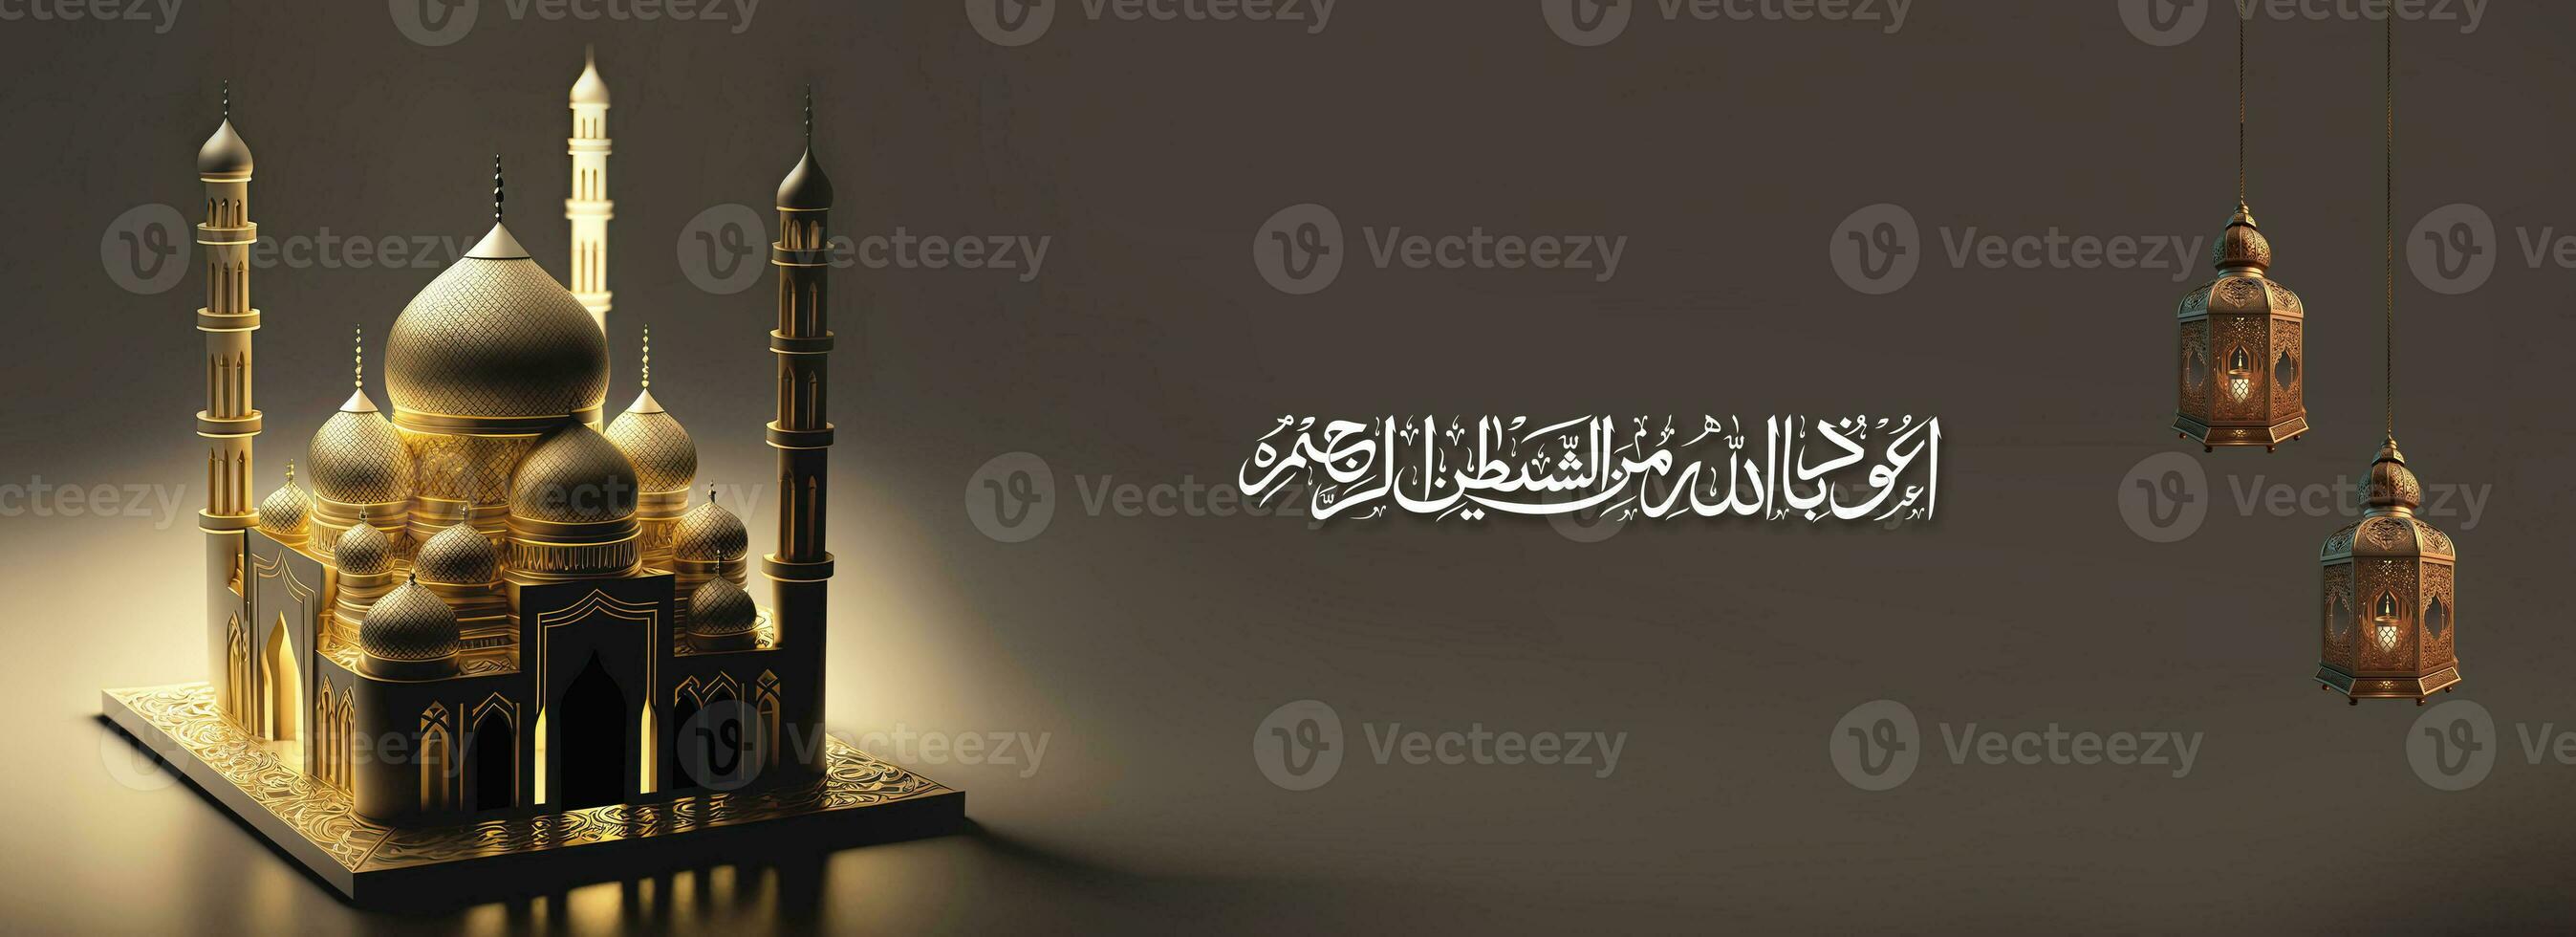 Arabic Islamic Calligraphy of Wish Fear of Allah brings Intelligence, Honesty and Love And 3D Render, Golden Exquisite Mosque. Banner or Header Design. photo